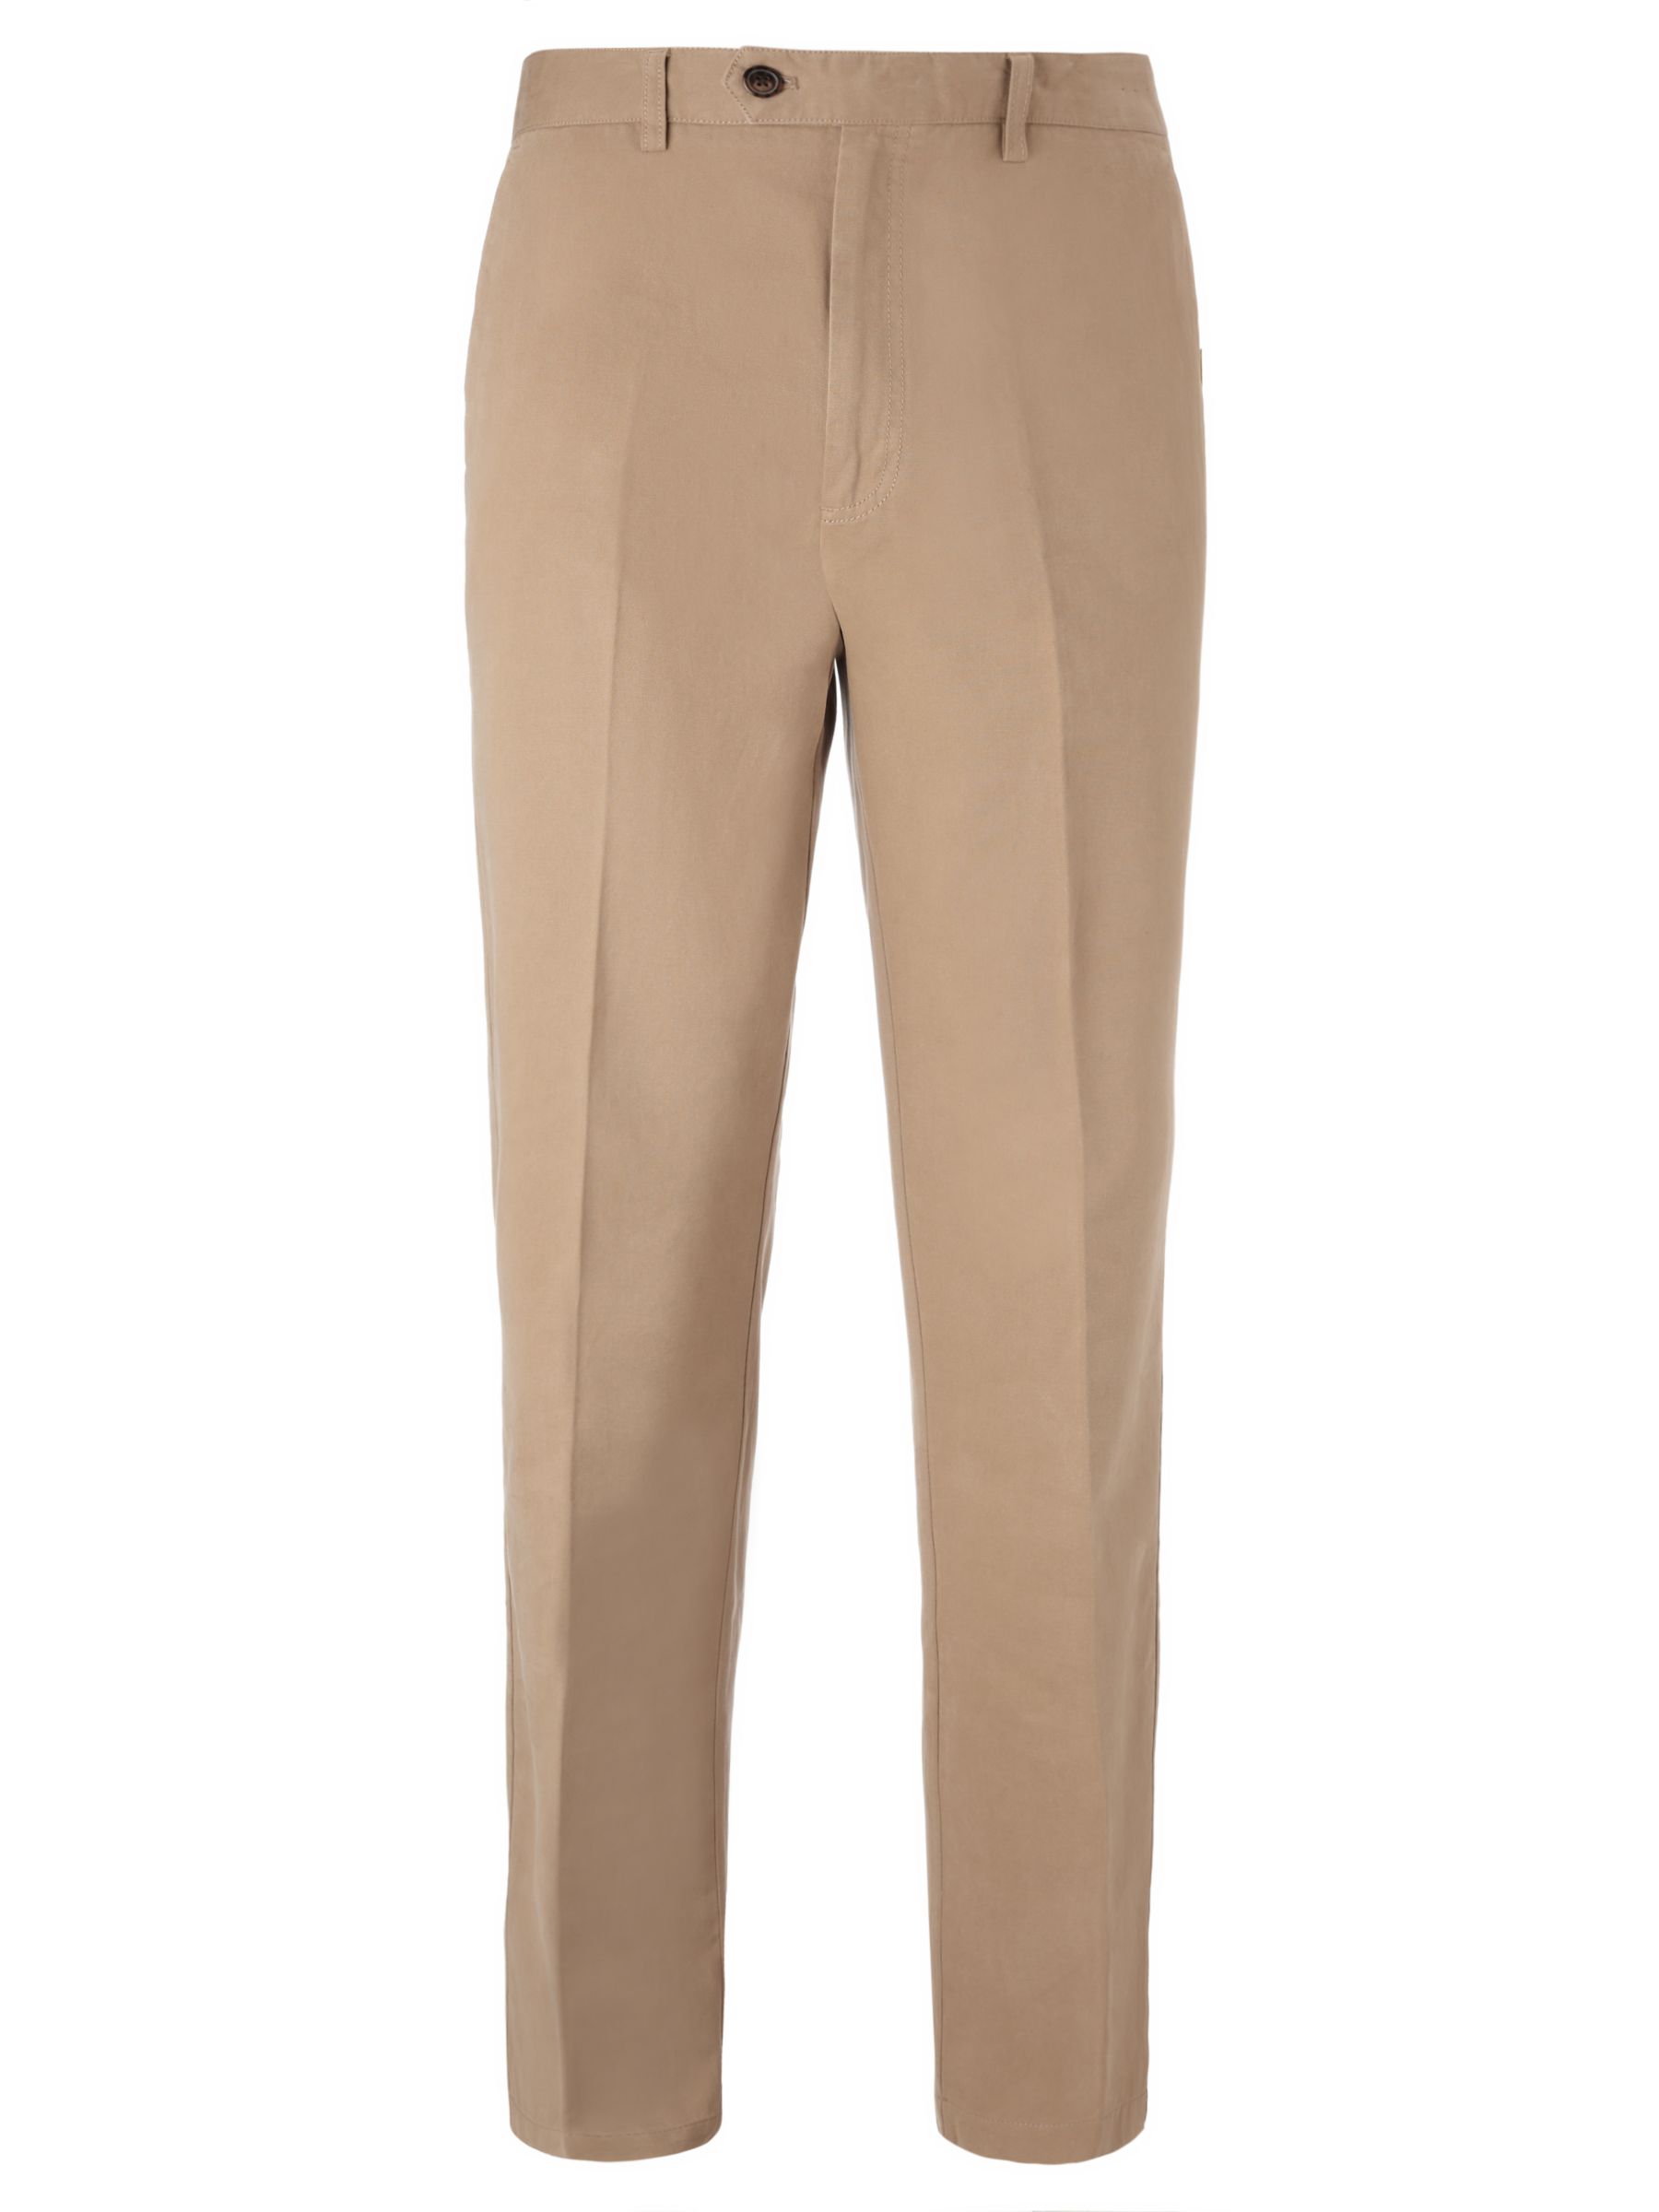 John Lewis & Partners Wrinkle Free Flat Front Trousers, Stone, 42R